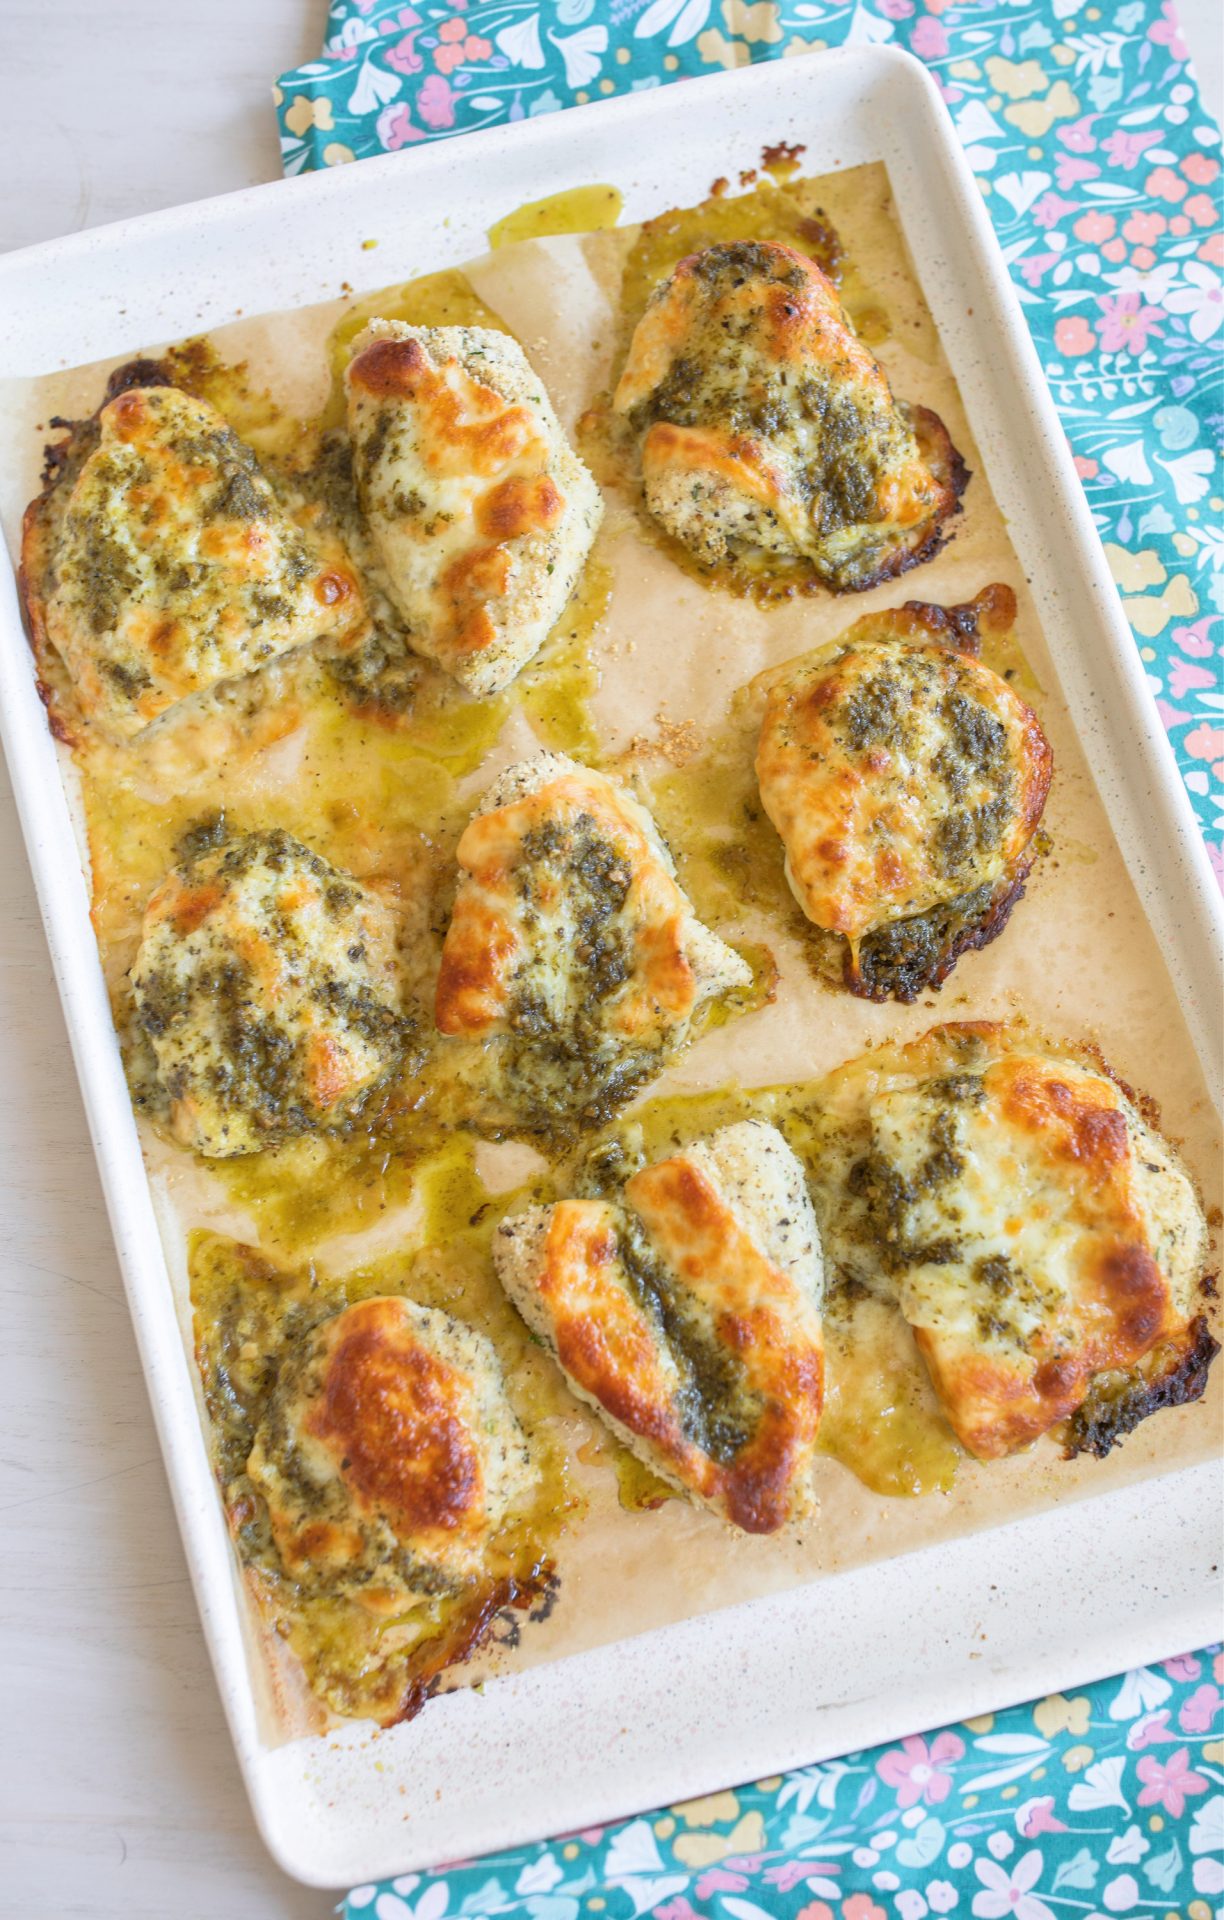 chicken, pesto, low carb, almond flour, breaded, dinner, gluten-free, baked chicken, low carb, keto, chicken parmesan, chicken pesto, roasted, easy dinner recipe 